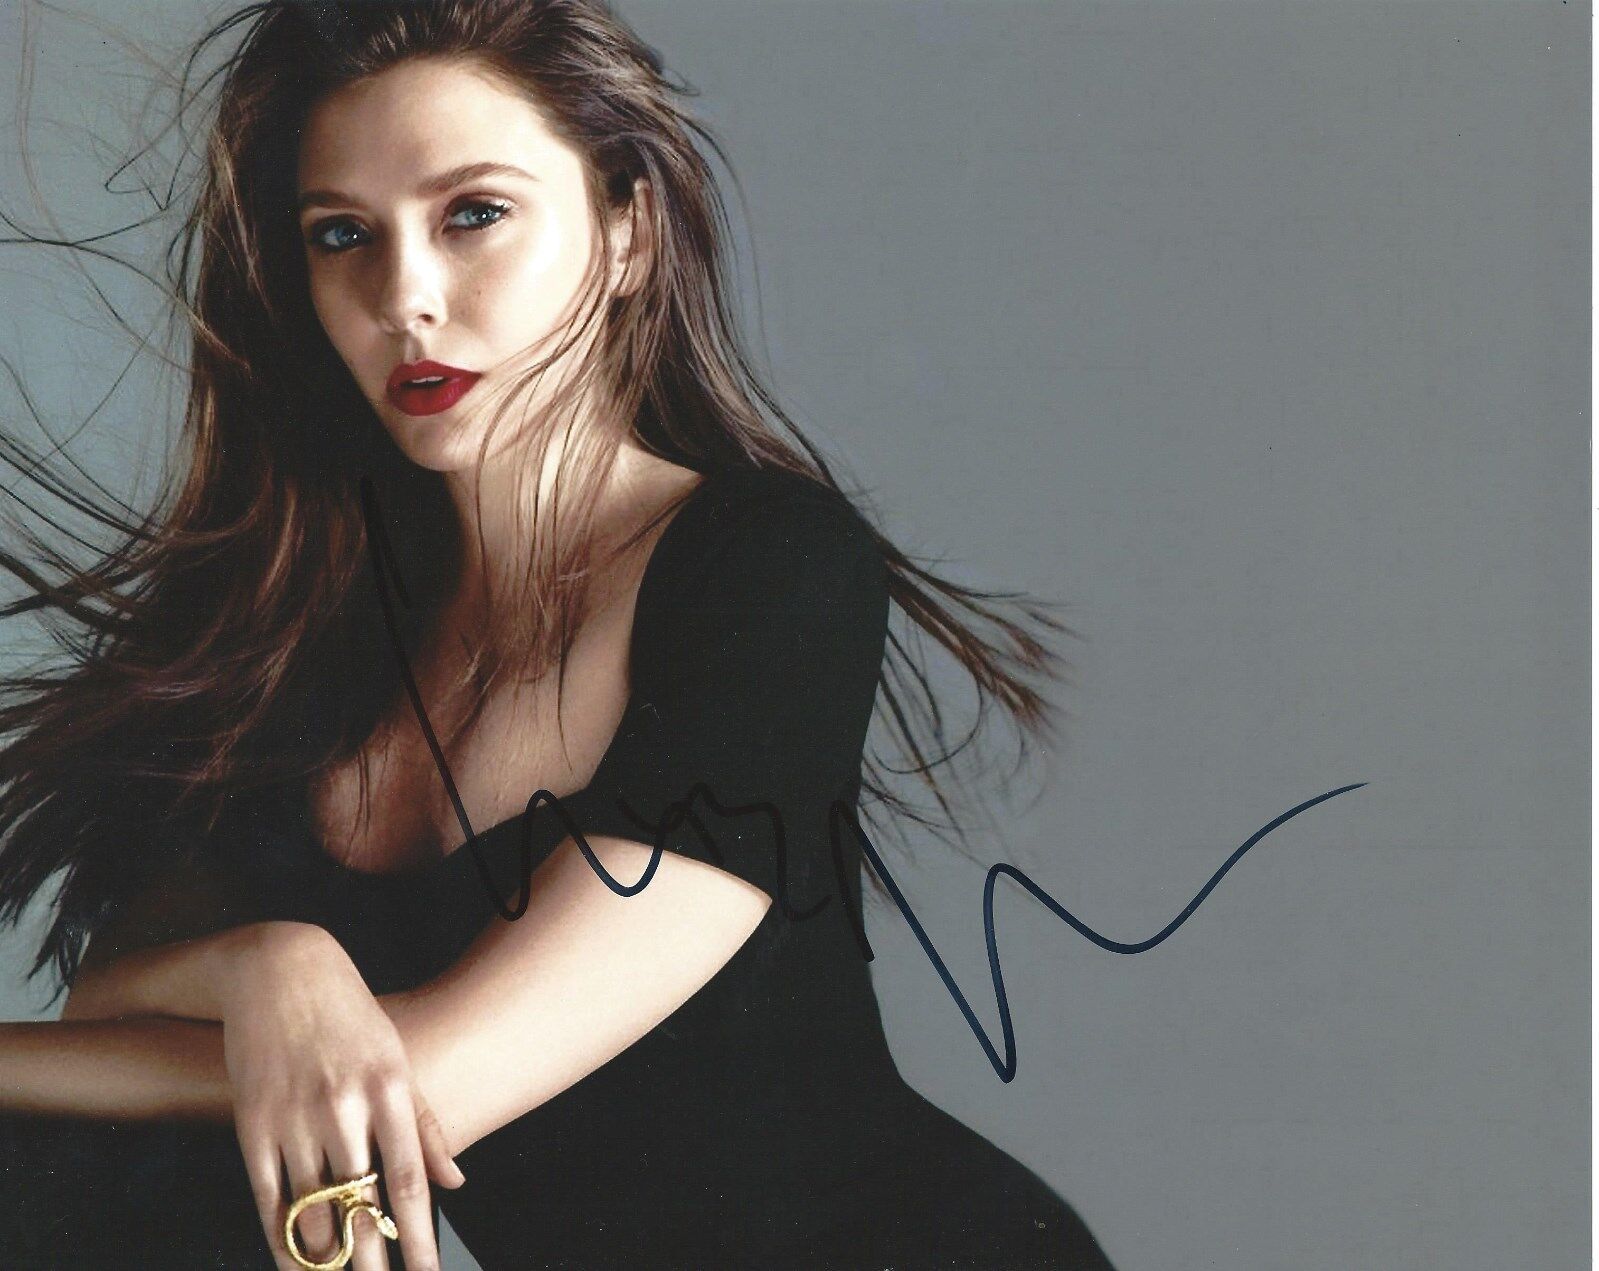 Elizabeth Olsen Sexy Actress Hand Signed 8x10 Hott Photo Poster painting Autographed w/COA